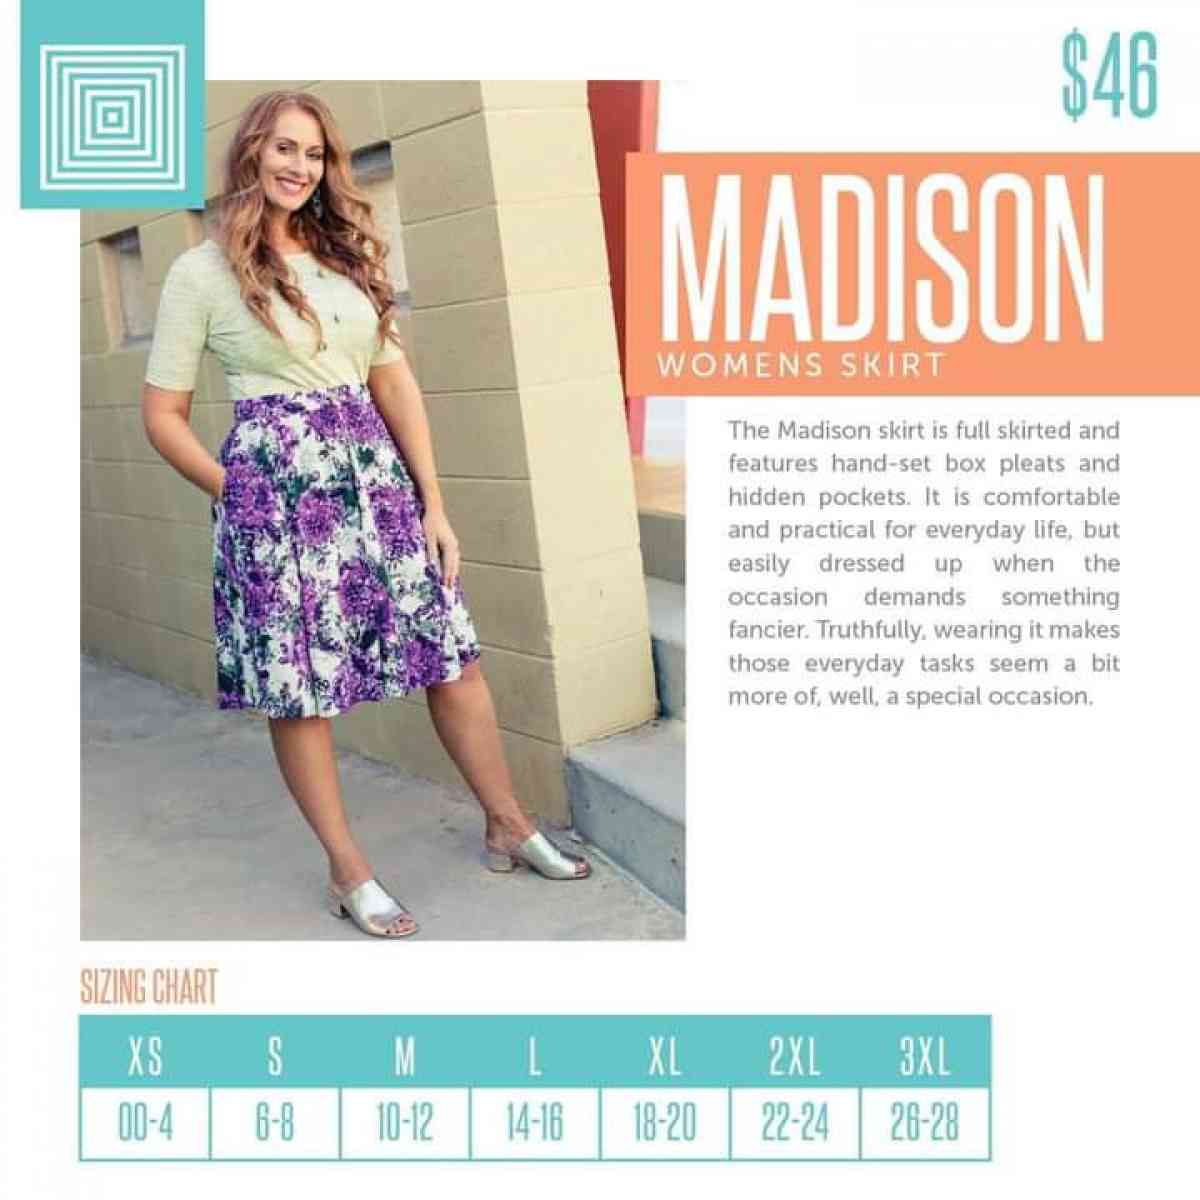 NWT 3XL LuLaRoe Cassic T and Madison Skirt outfit 35